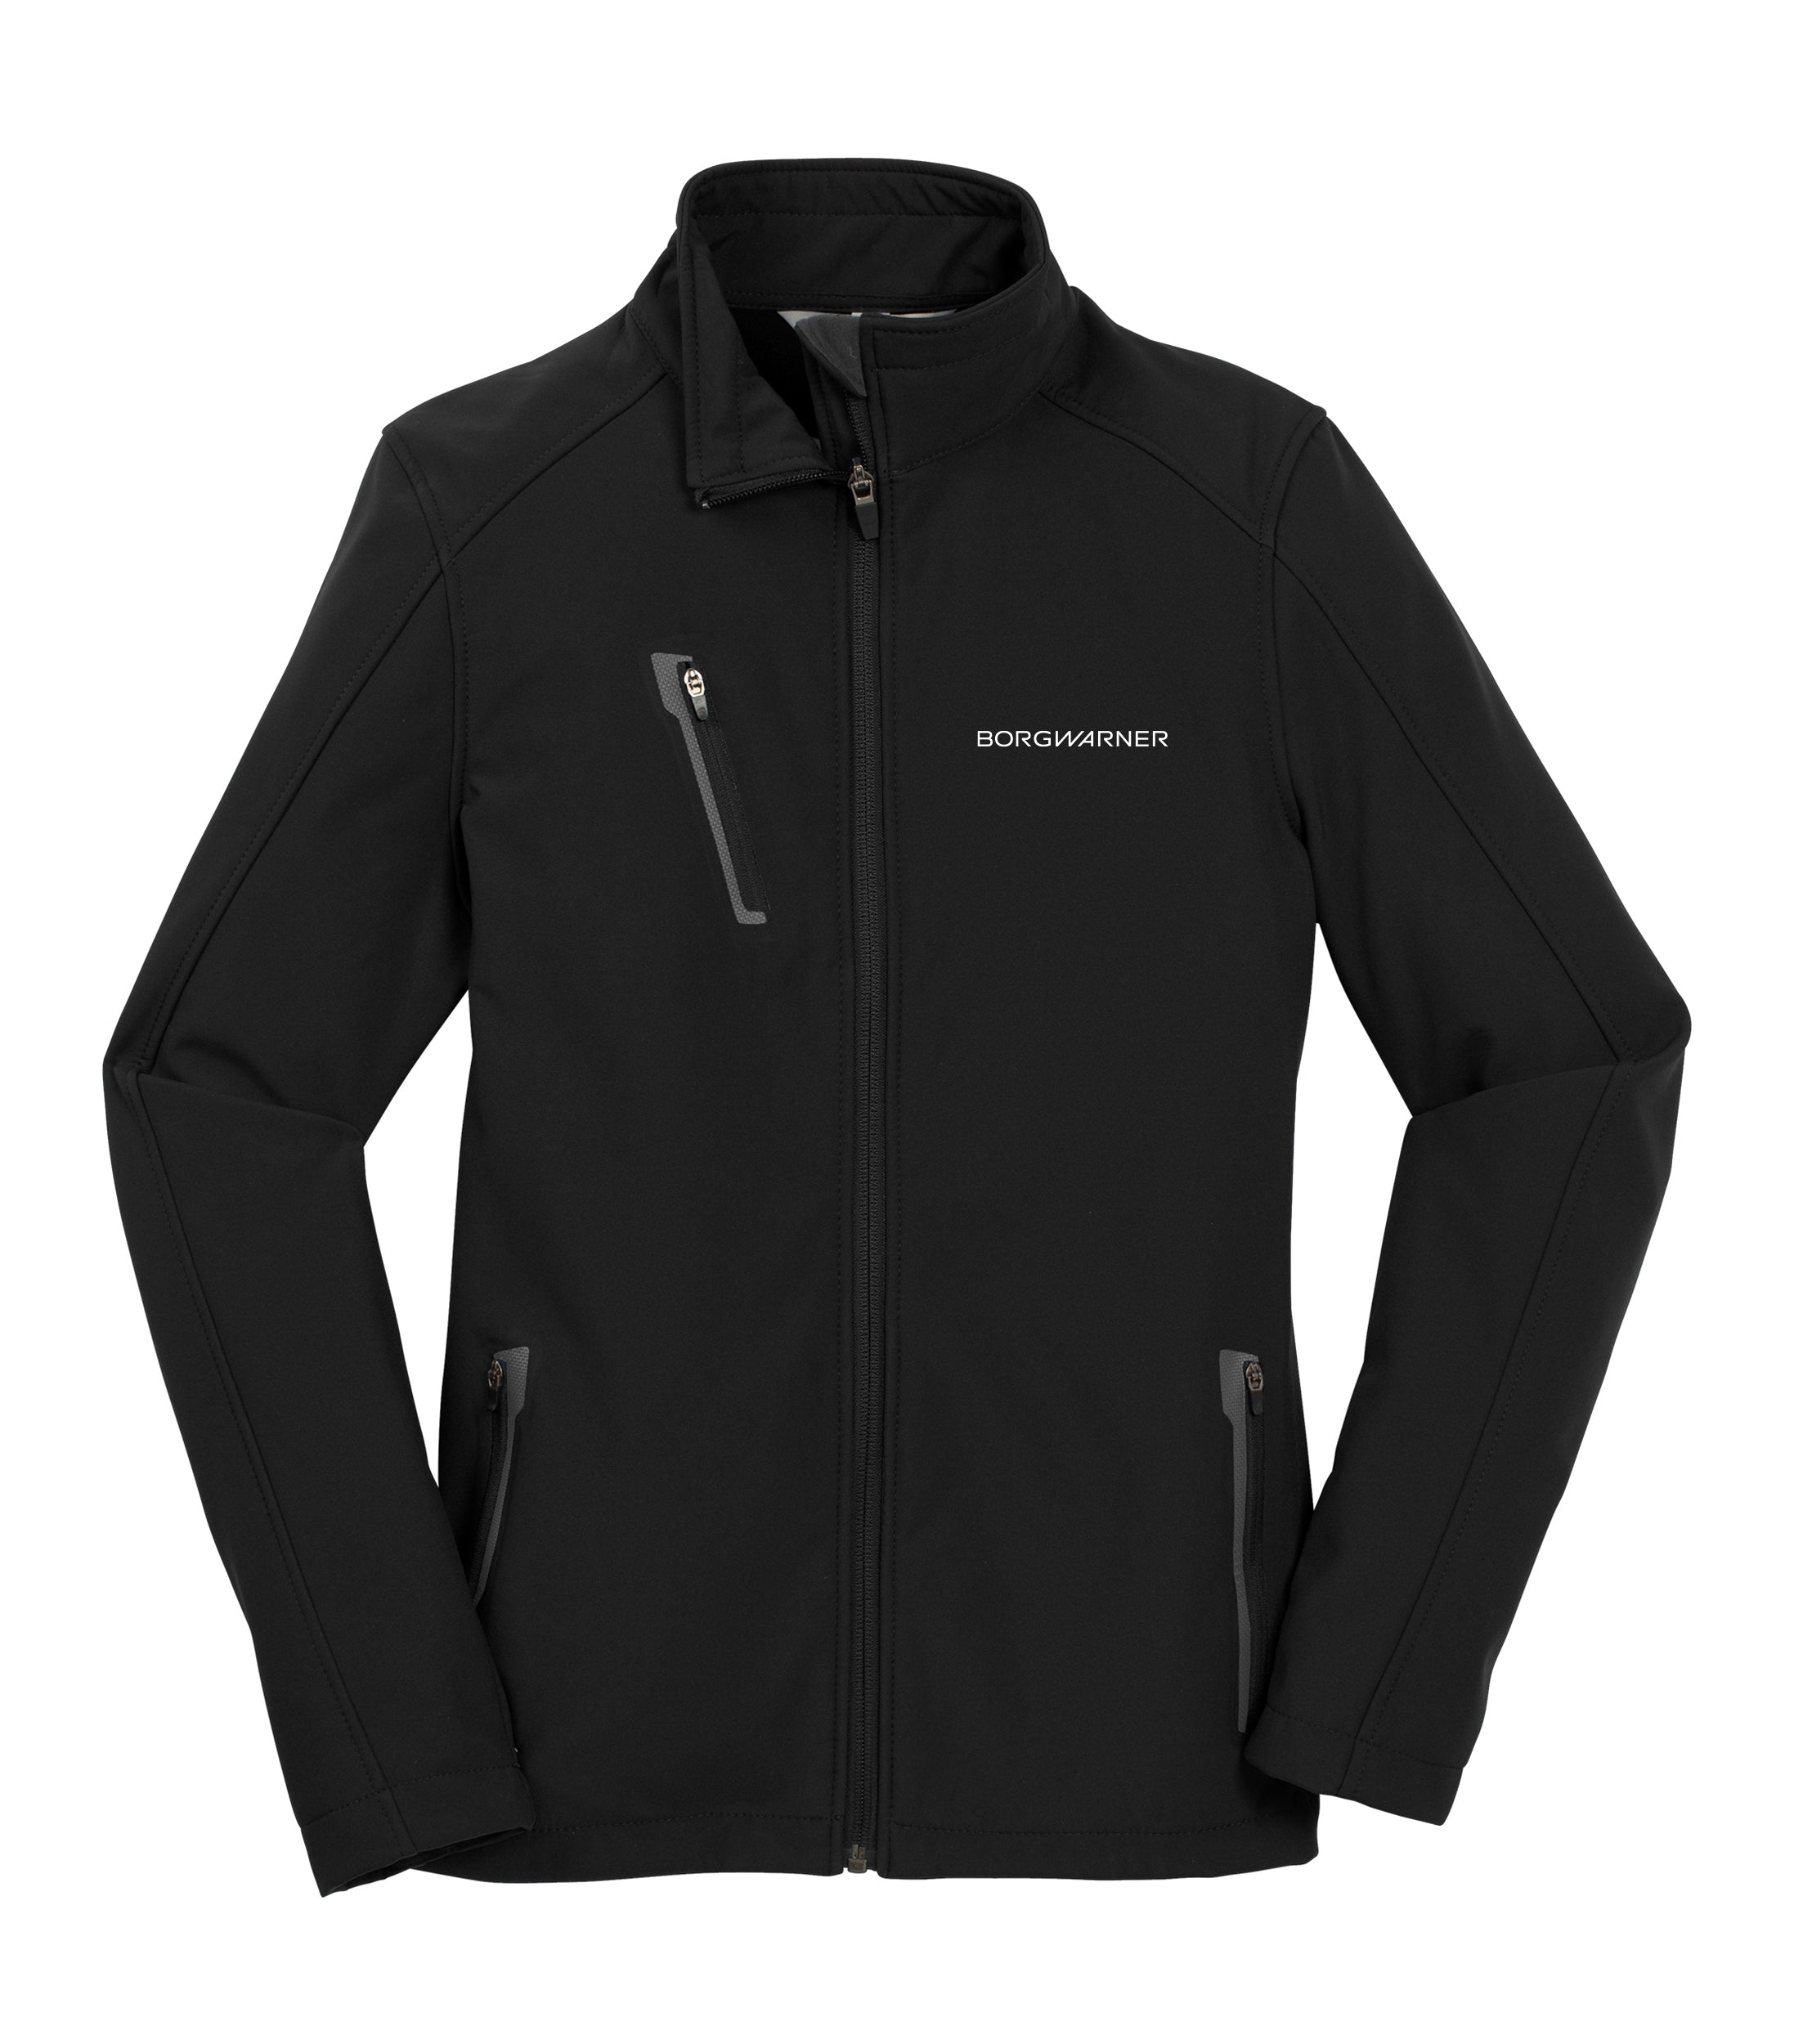 Port Authority Ladies Welded Soft Shell Jacket